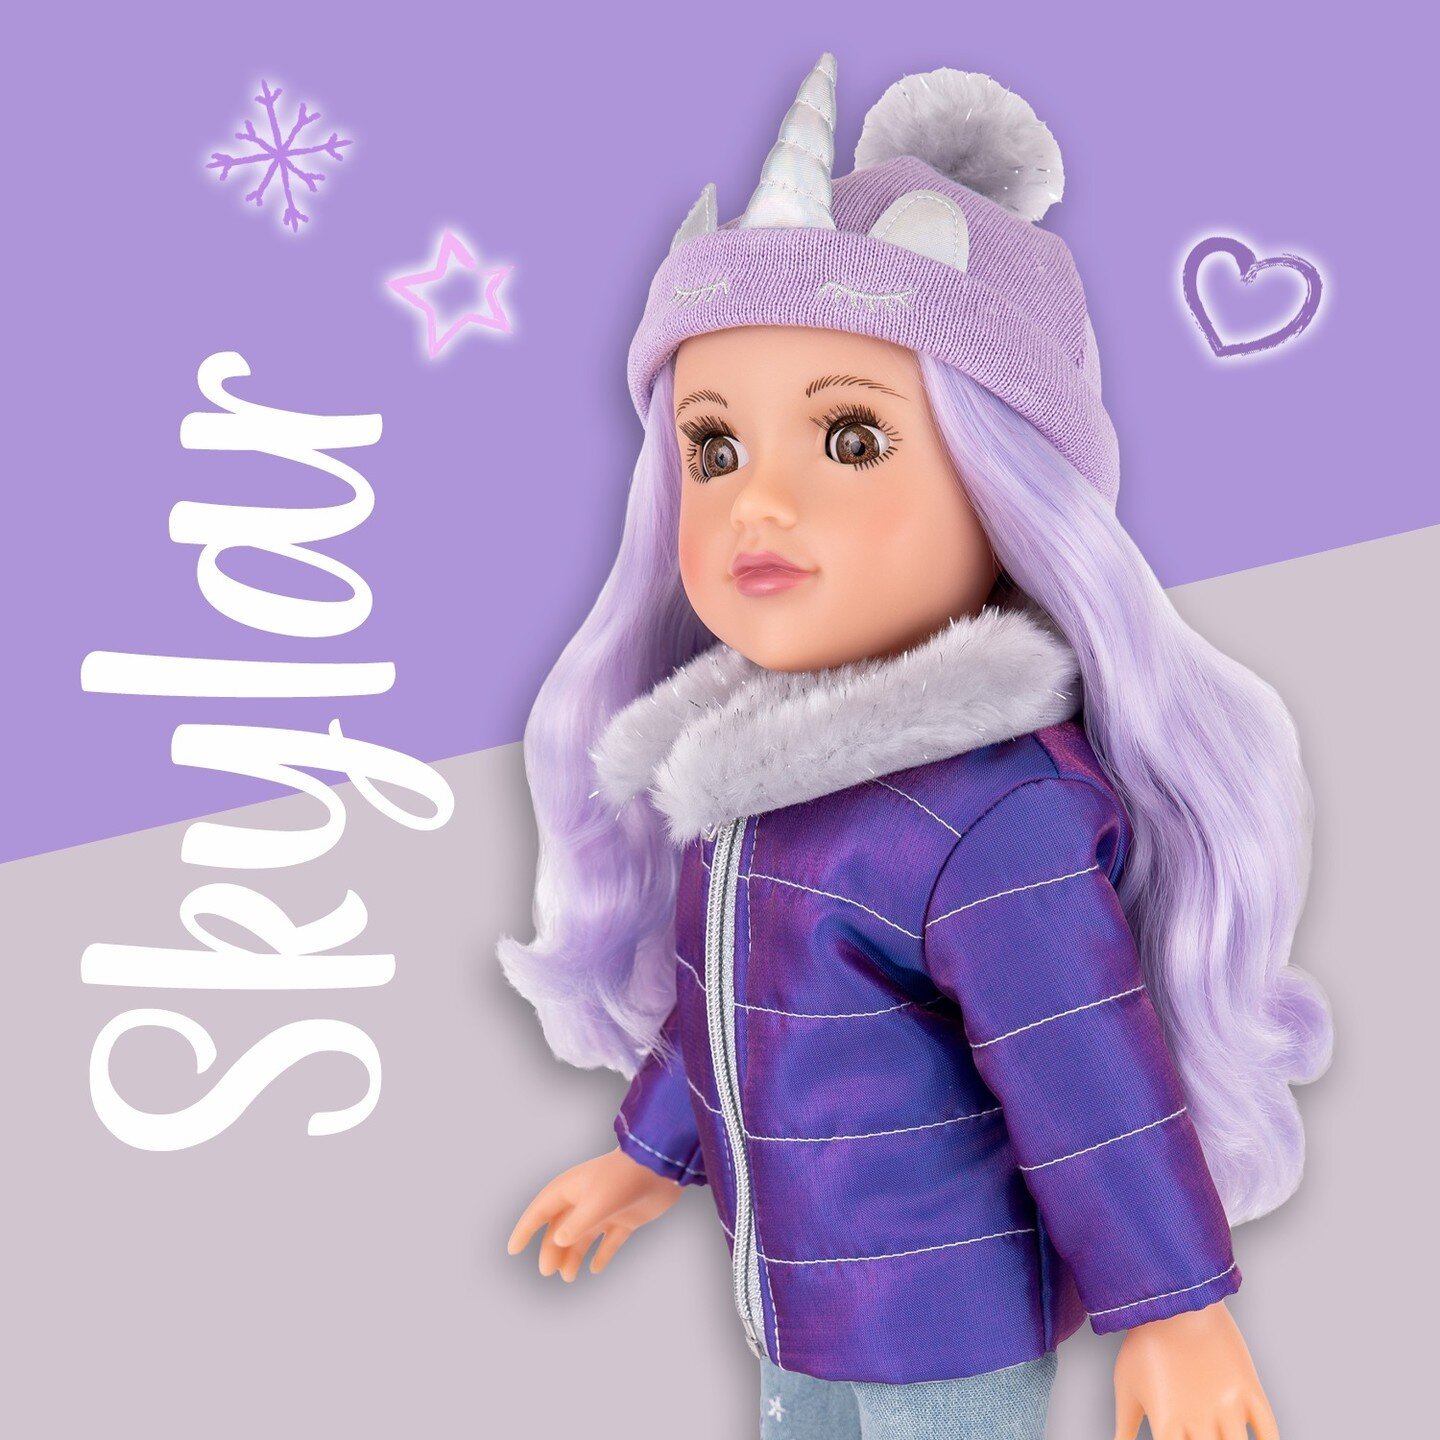 Skylar loves dogs! Let us know your dogs name in the comments! 🐶

#designafriend #dollphotography #fashiondolls #dolls  #18inchdollclothes #dollstagram #18inchdolls  #americangirldoll #dollaccessories #roleplay #imaginaryplay #dollplay #learnthrough